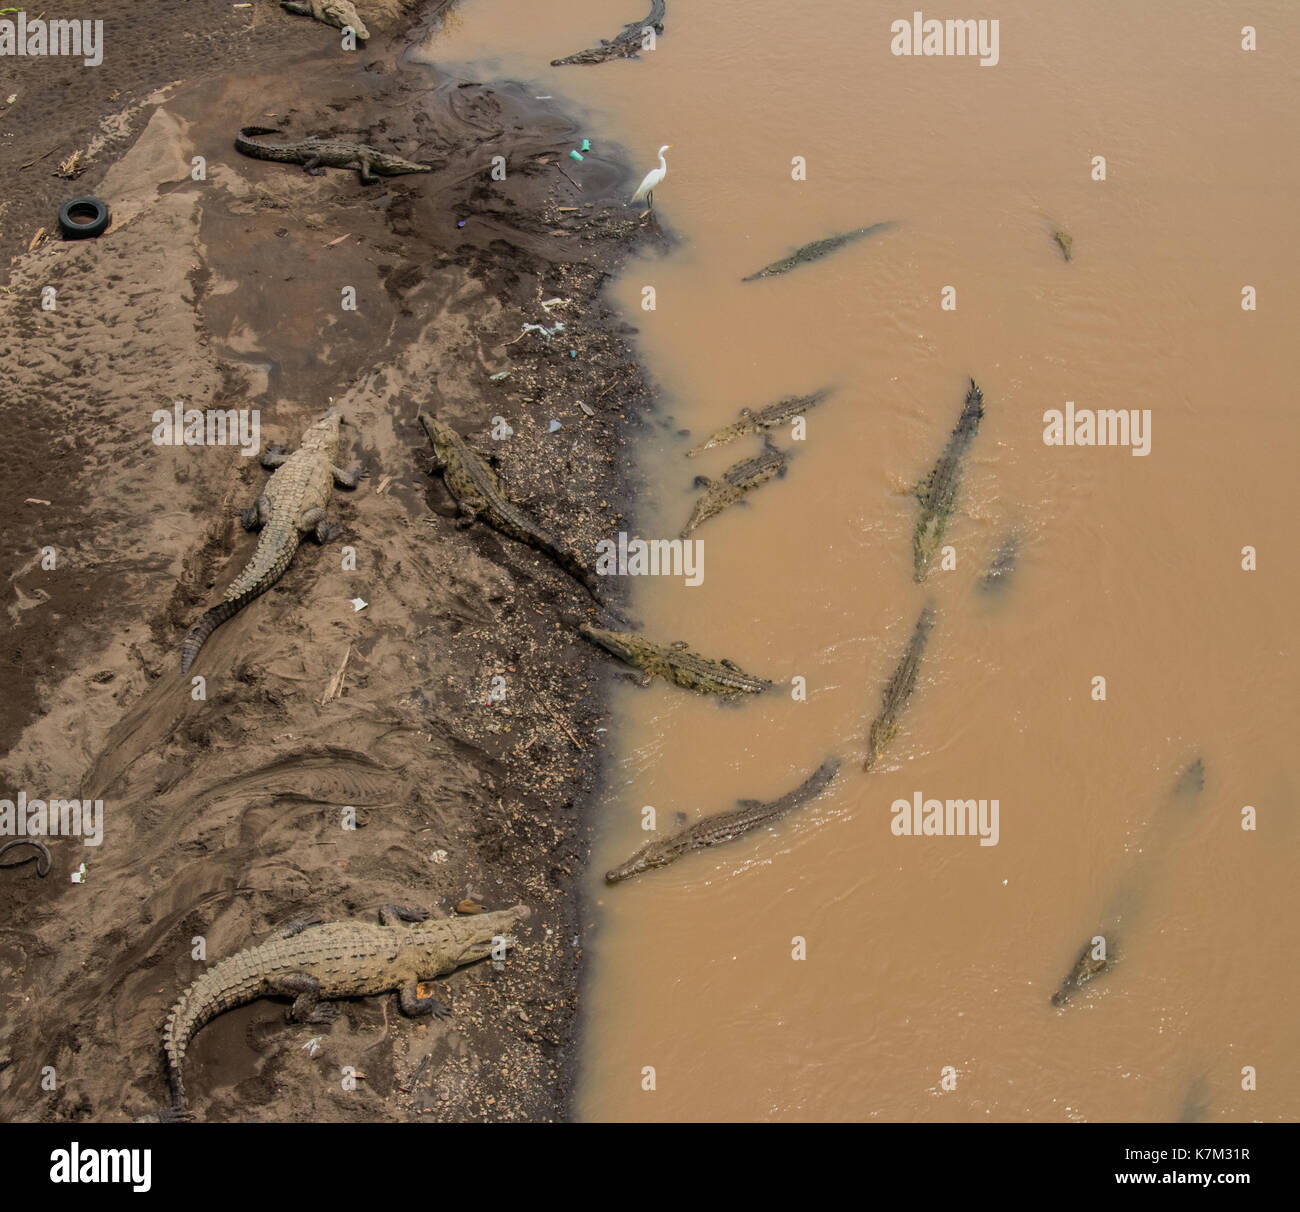 Egret standing in the middle of Crocodiles Stock Photo